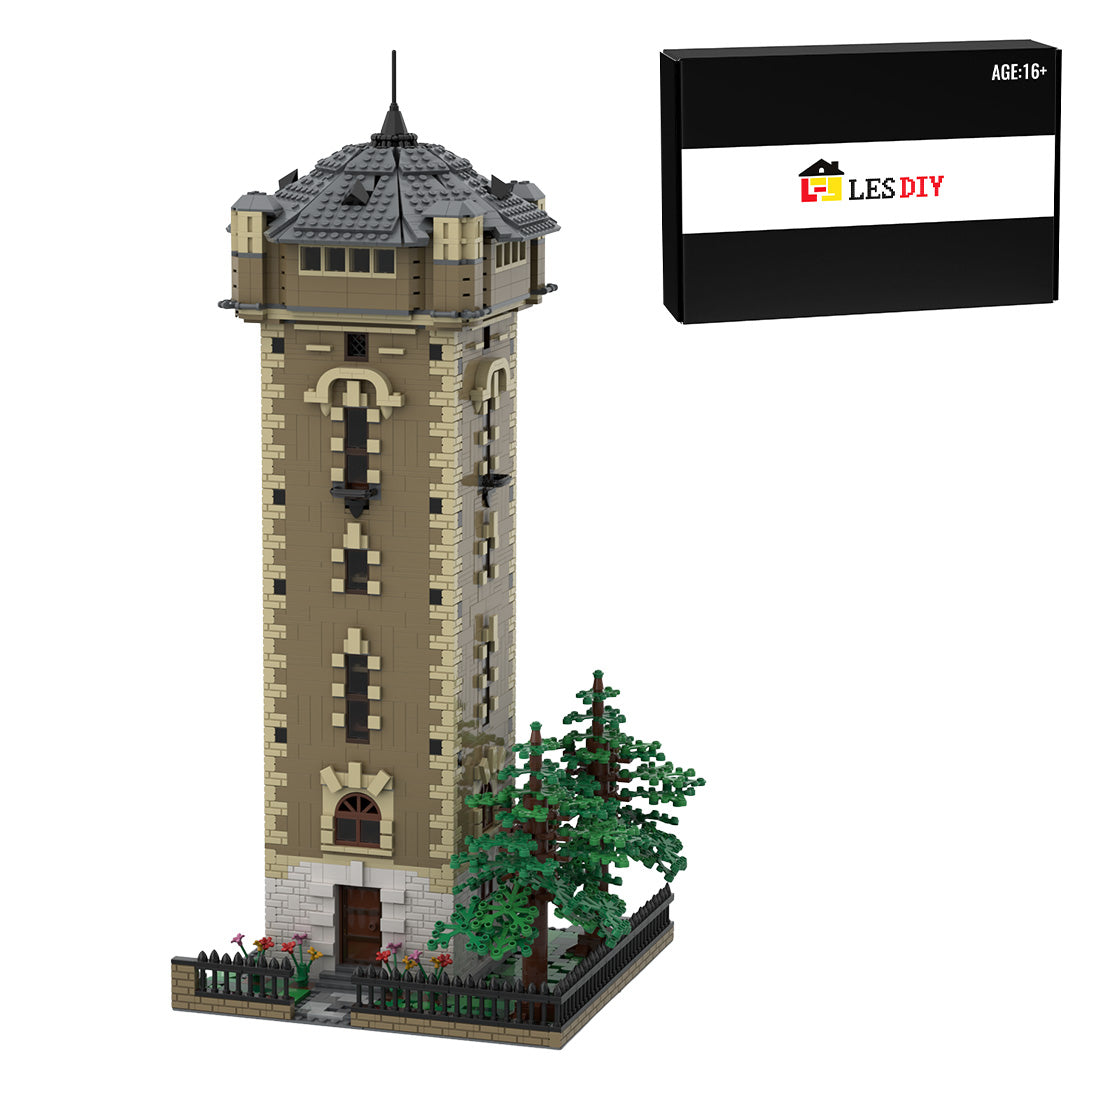 MOC-160598 Old Water Tower